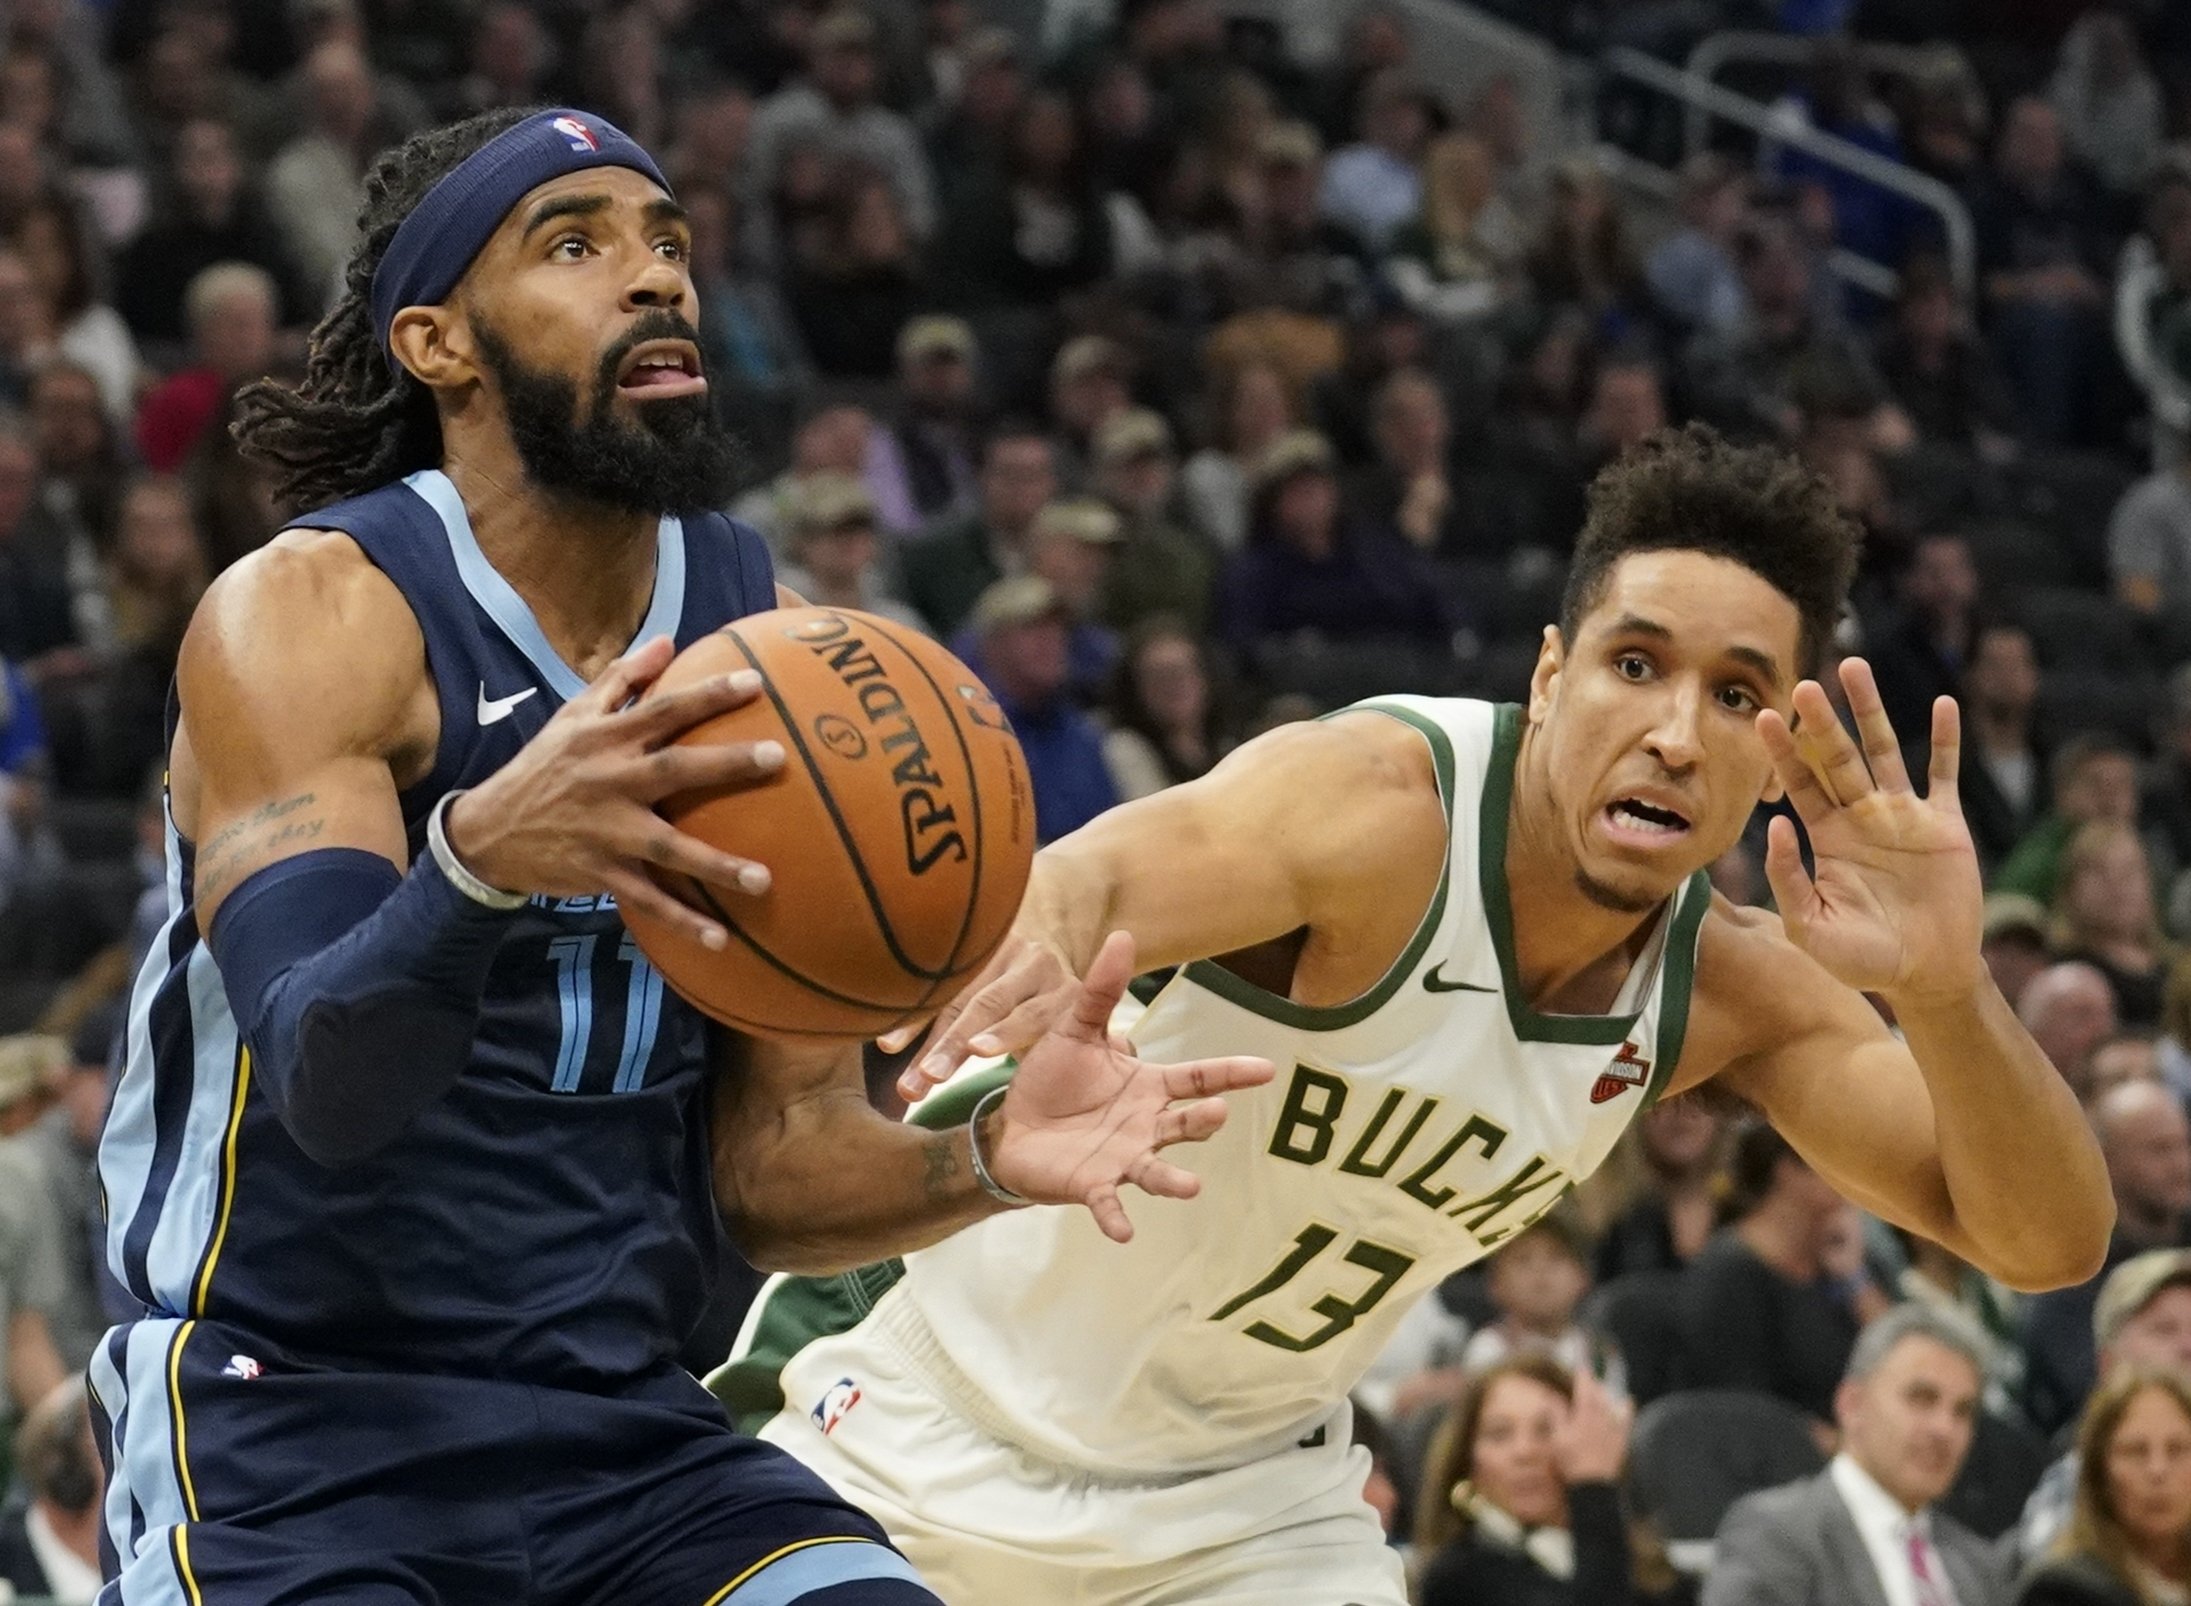 Giannis scores 31 but Grizzlies’ 1-2 punch was better